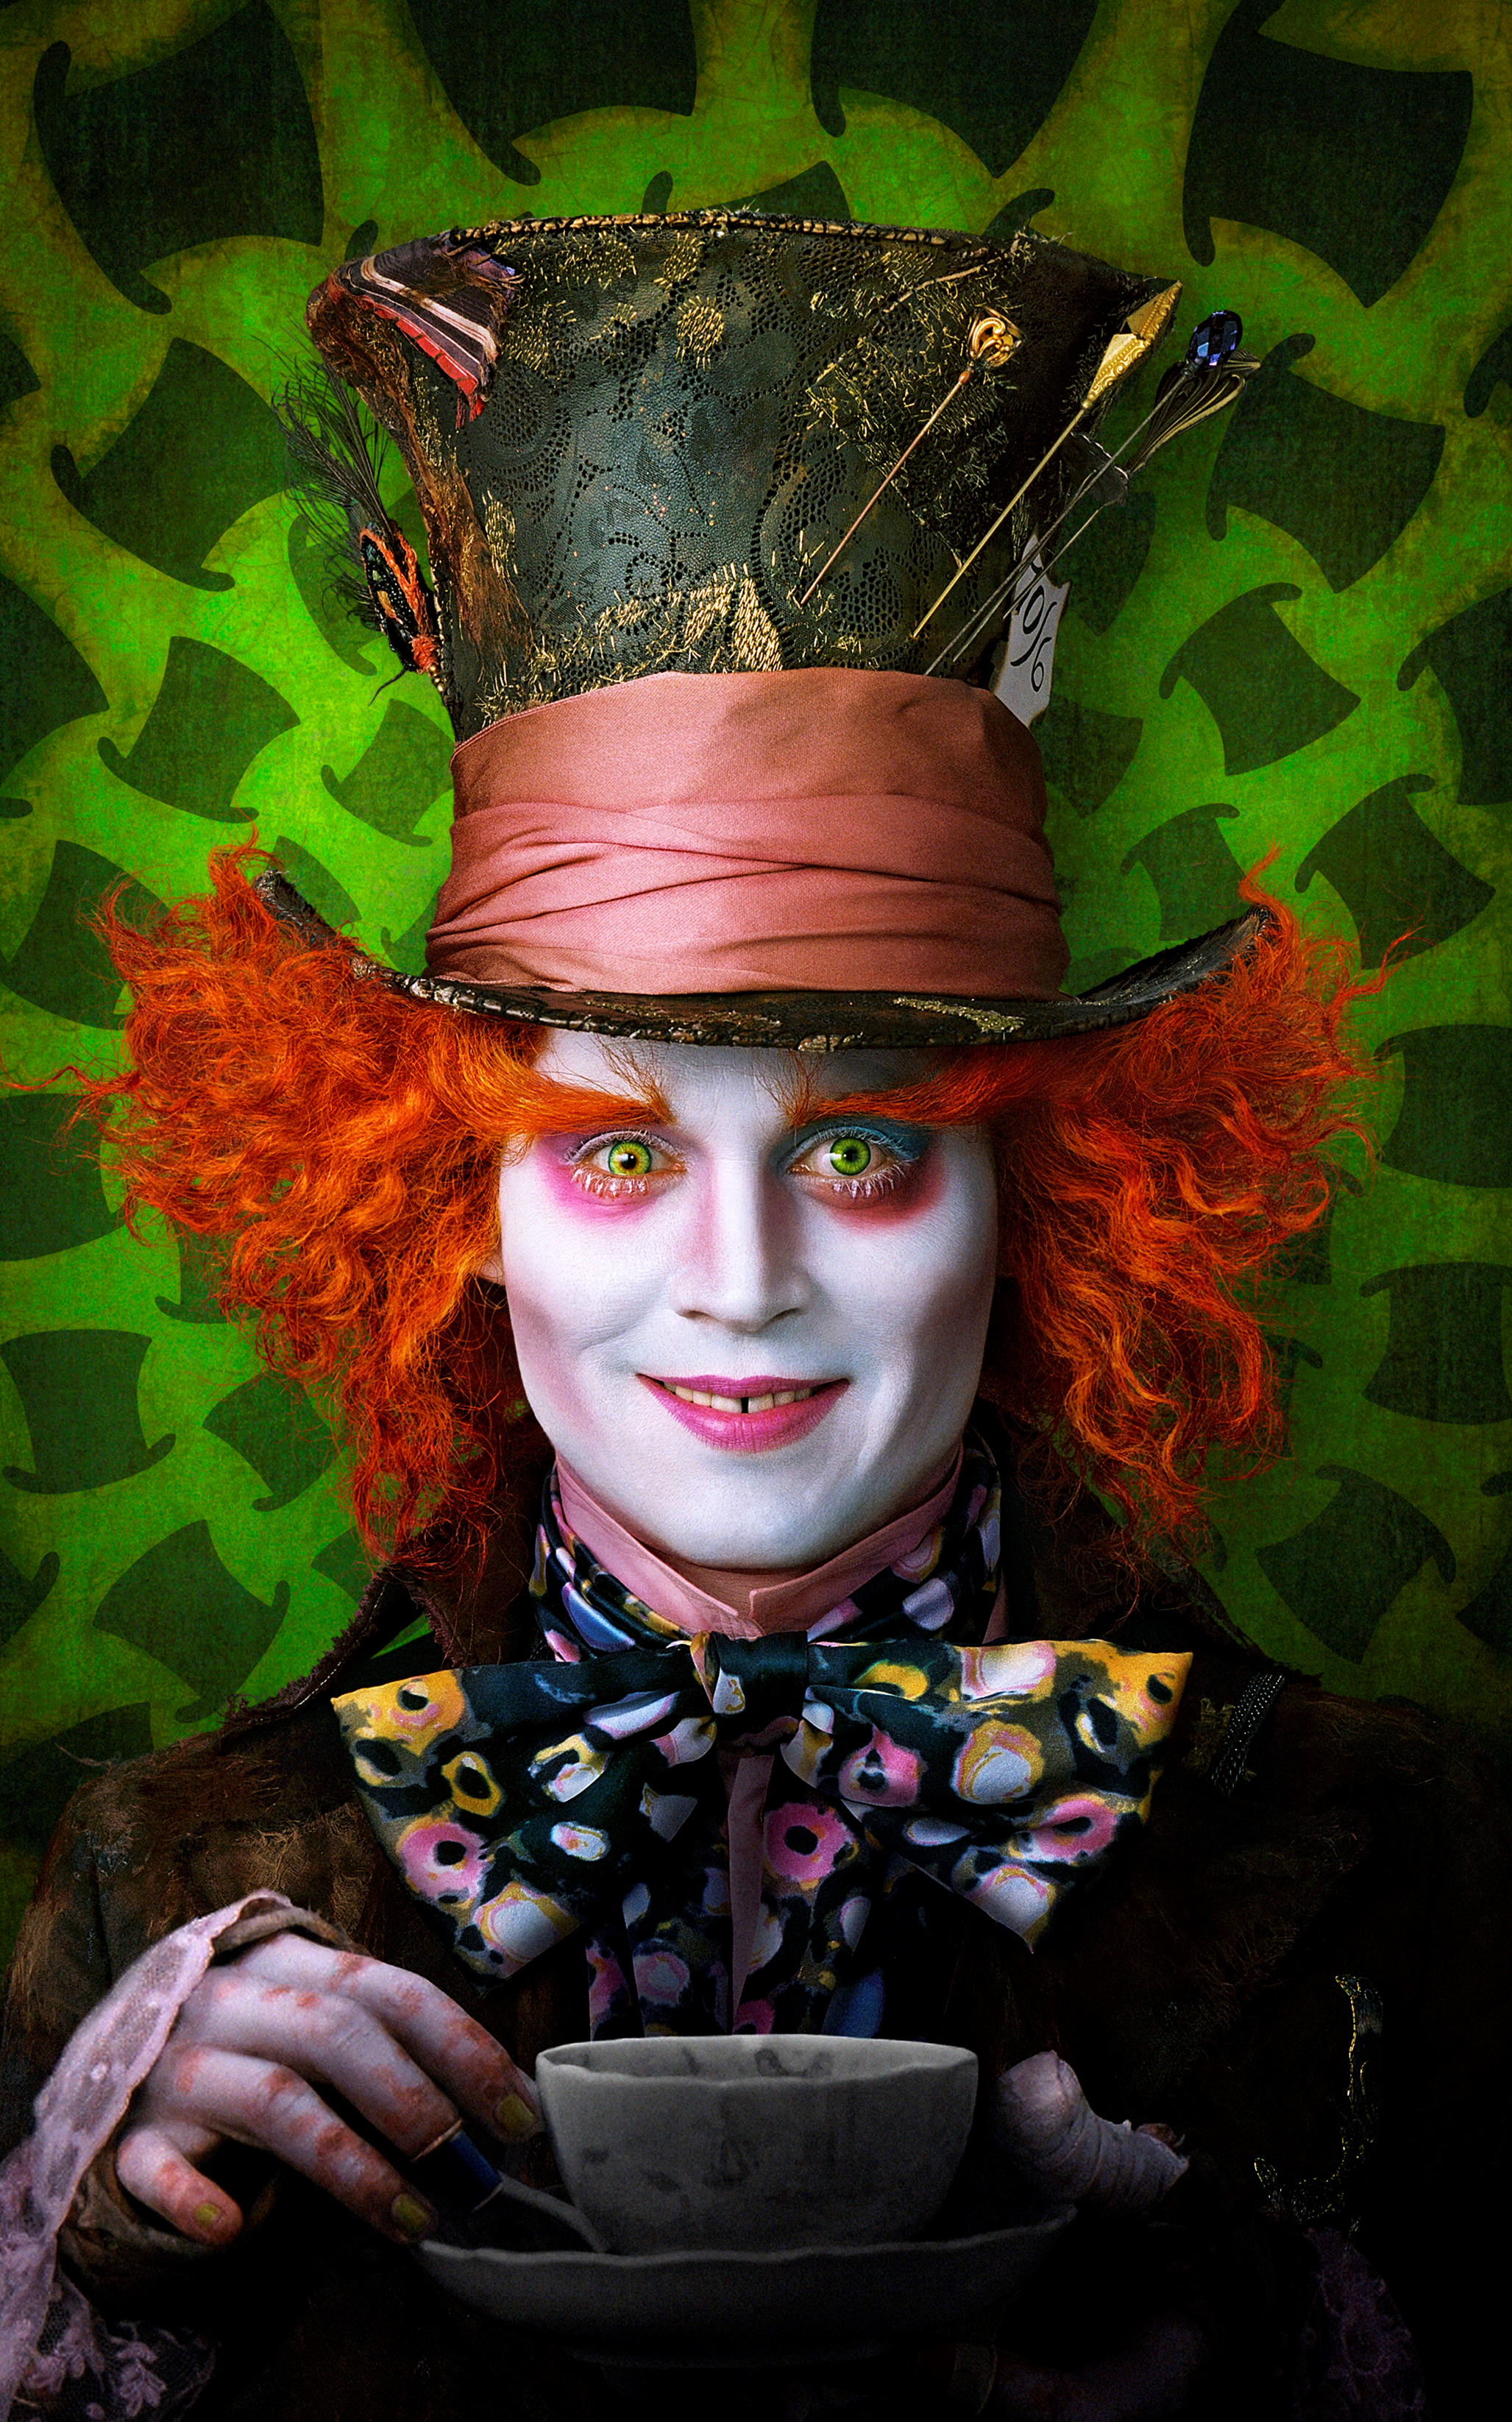 Mad Hatter costume designed by Colleen Atwood for Tim Burton's 2010 adaptation Of Alice in Wonderland, worn by Johnny Depp